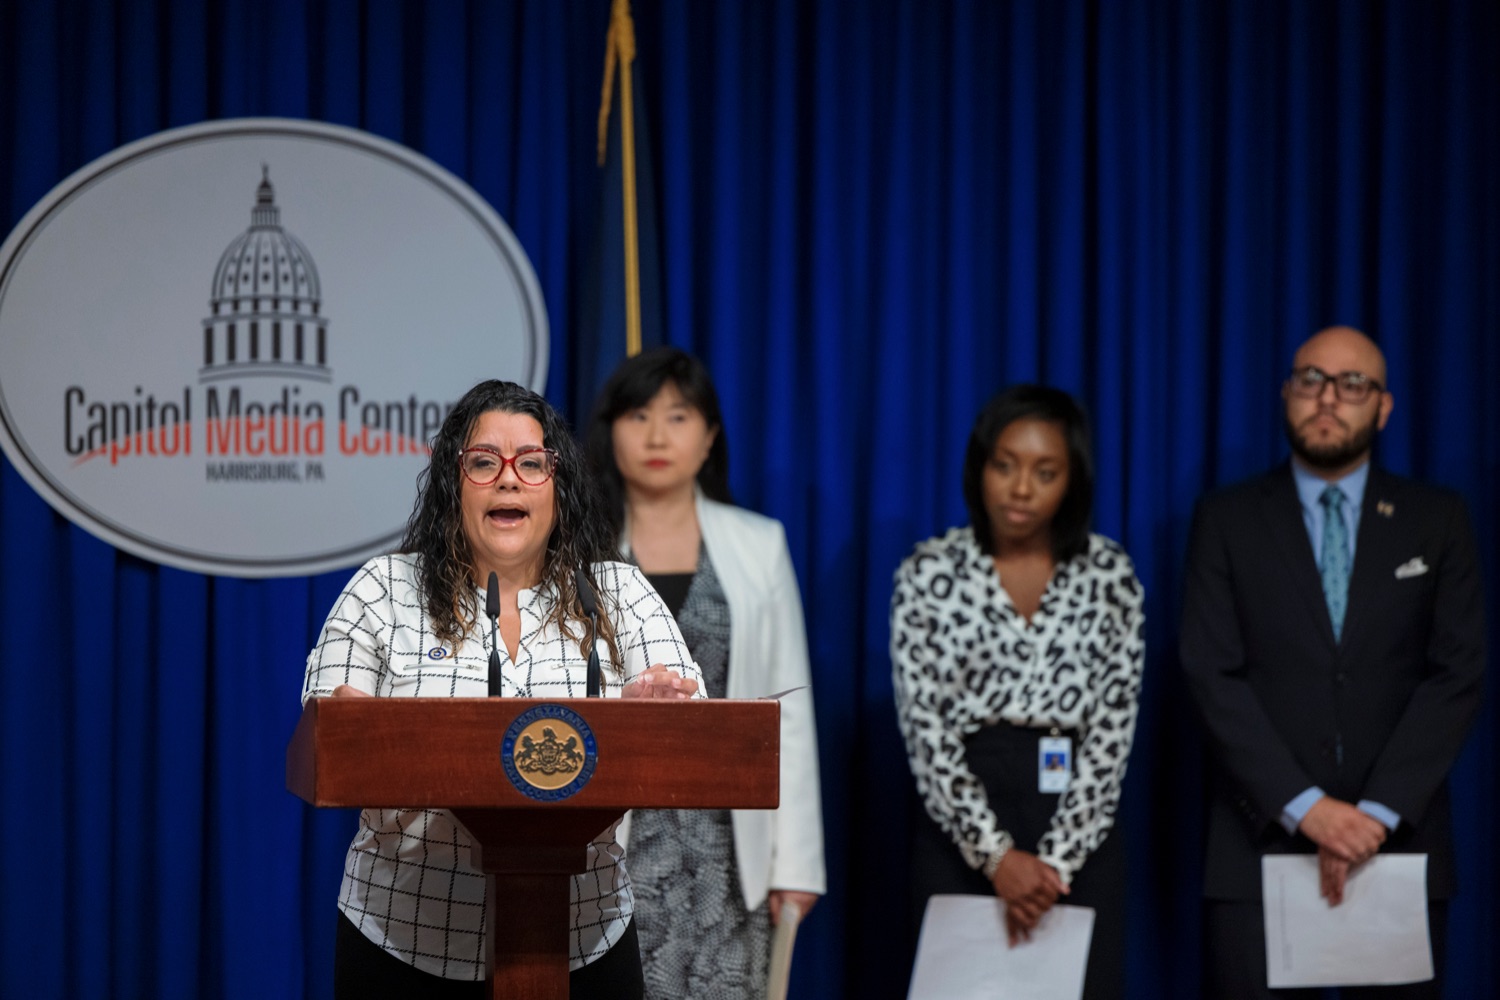 Luz Colon, executive director of the Commission on Latino Affairs, speaks during a press conference, which highlighted the Wolf Administrations efforts to expand voter access, inside the Capitol Media Center on Tuesday, September 13, 2022. The press conference reminded Pennsylvanians Oct 24. is the deadline to register to vote in the November election. Whether a voter is requesting a no-excuse mail-in ballot from the comfort of their home or showing up to the polls on Election Day and proudly wearing an I voted sticker, voting is a constitutional right and a way for people to make their voice heard, Acting Secretary of State Leigh M. Chapman said. I am honored to be part of an administration that continues to work hard so everyone has equal access to the ballot box. .<br><a href="https://filesource.amperwave.net/commonwealthofpa/photo/22138_CFW_VotingPA_NK_007.JPG" target="_blank">⇣ Download Photo</a>